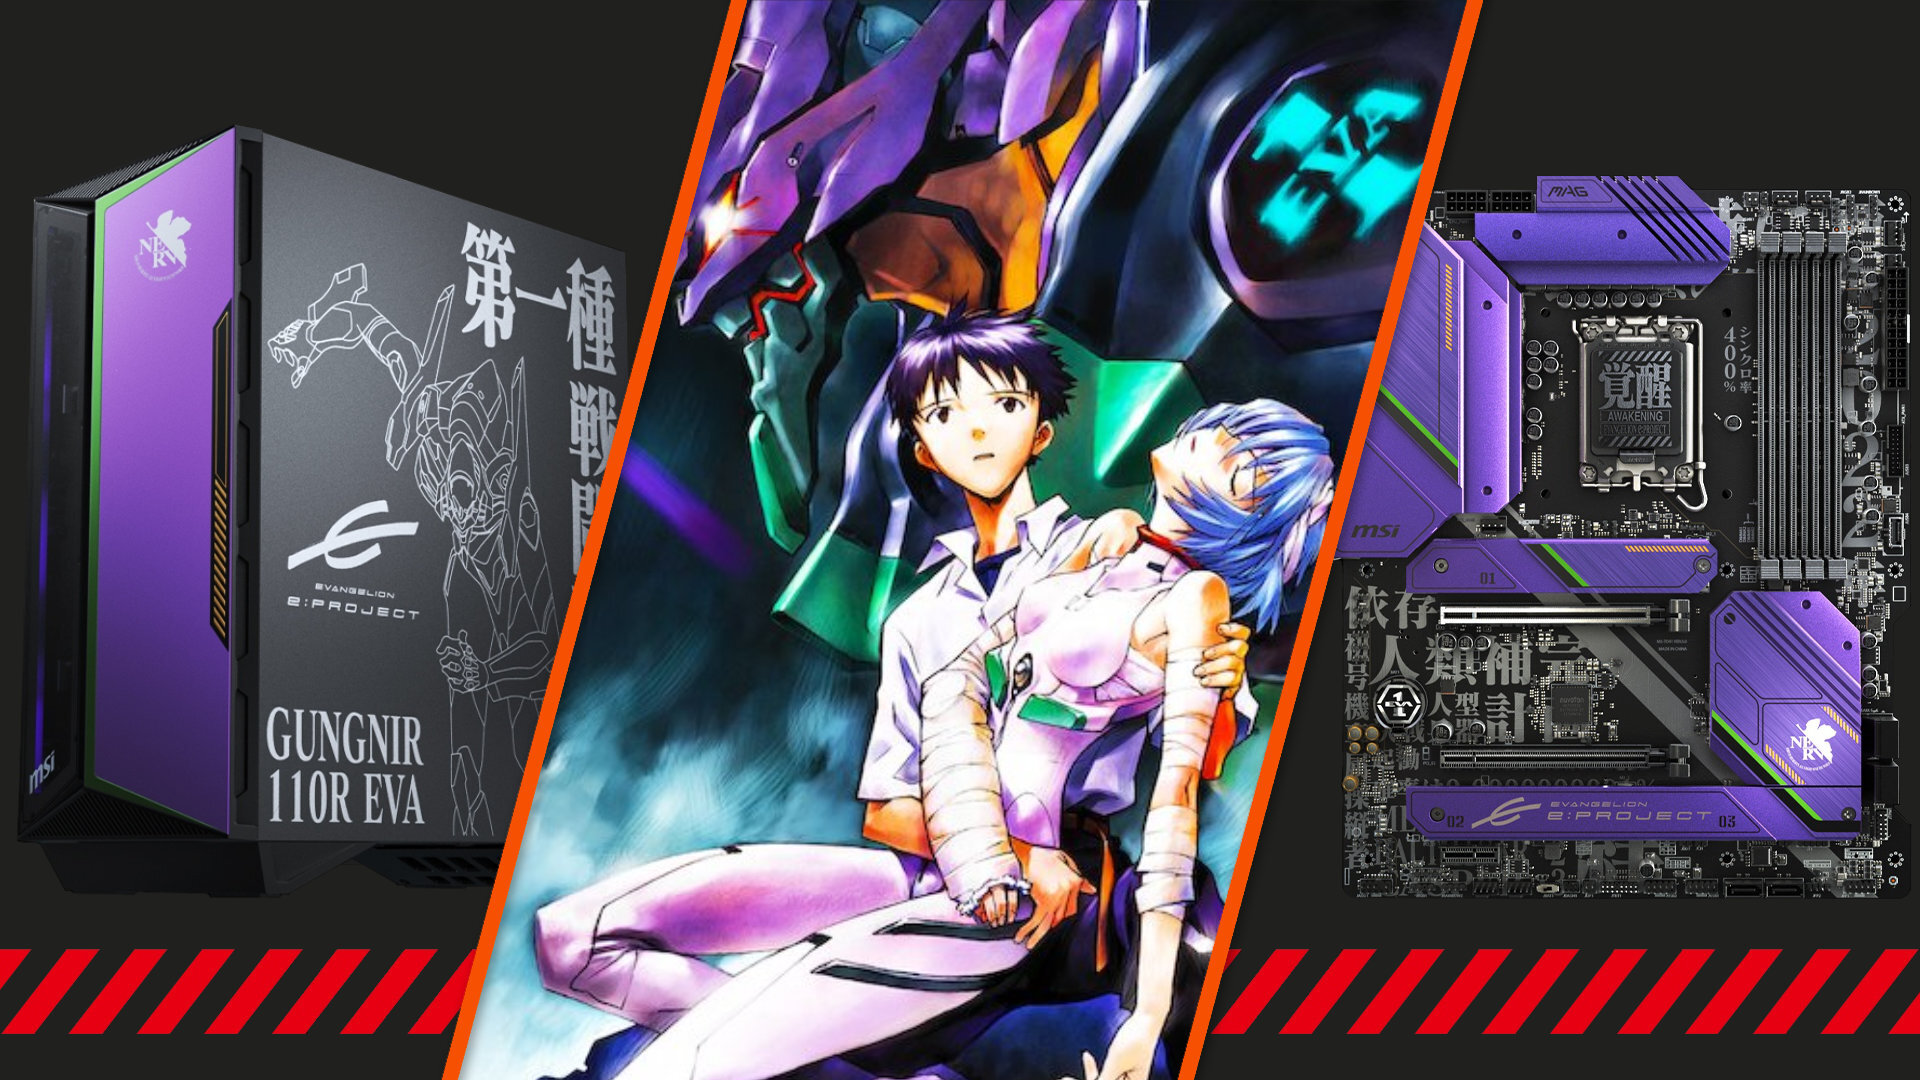 MSI’s Evangelion gaming PC collection is fan service done right